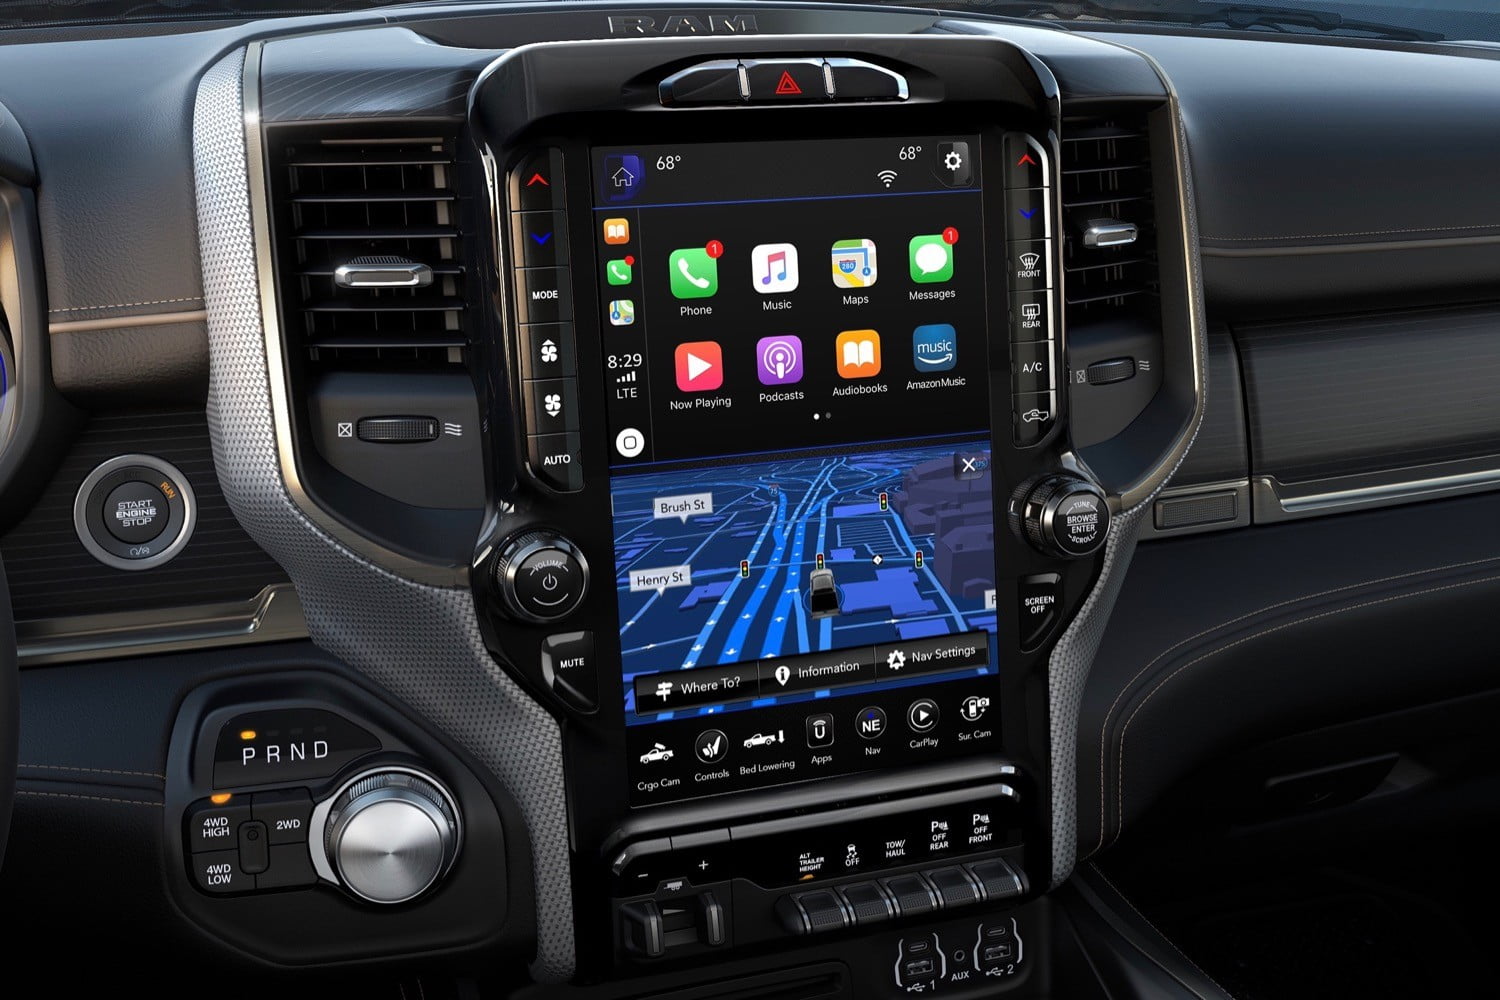 In-Car Infotainment Systems - What You Need to Know